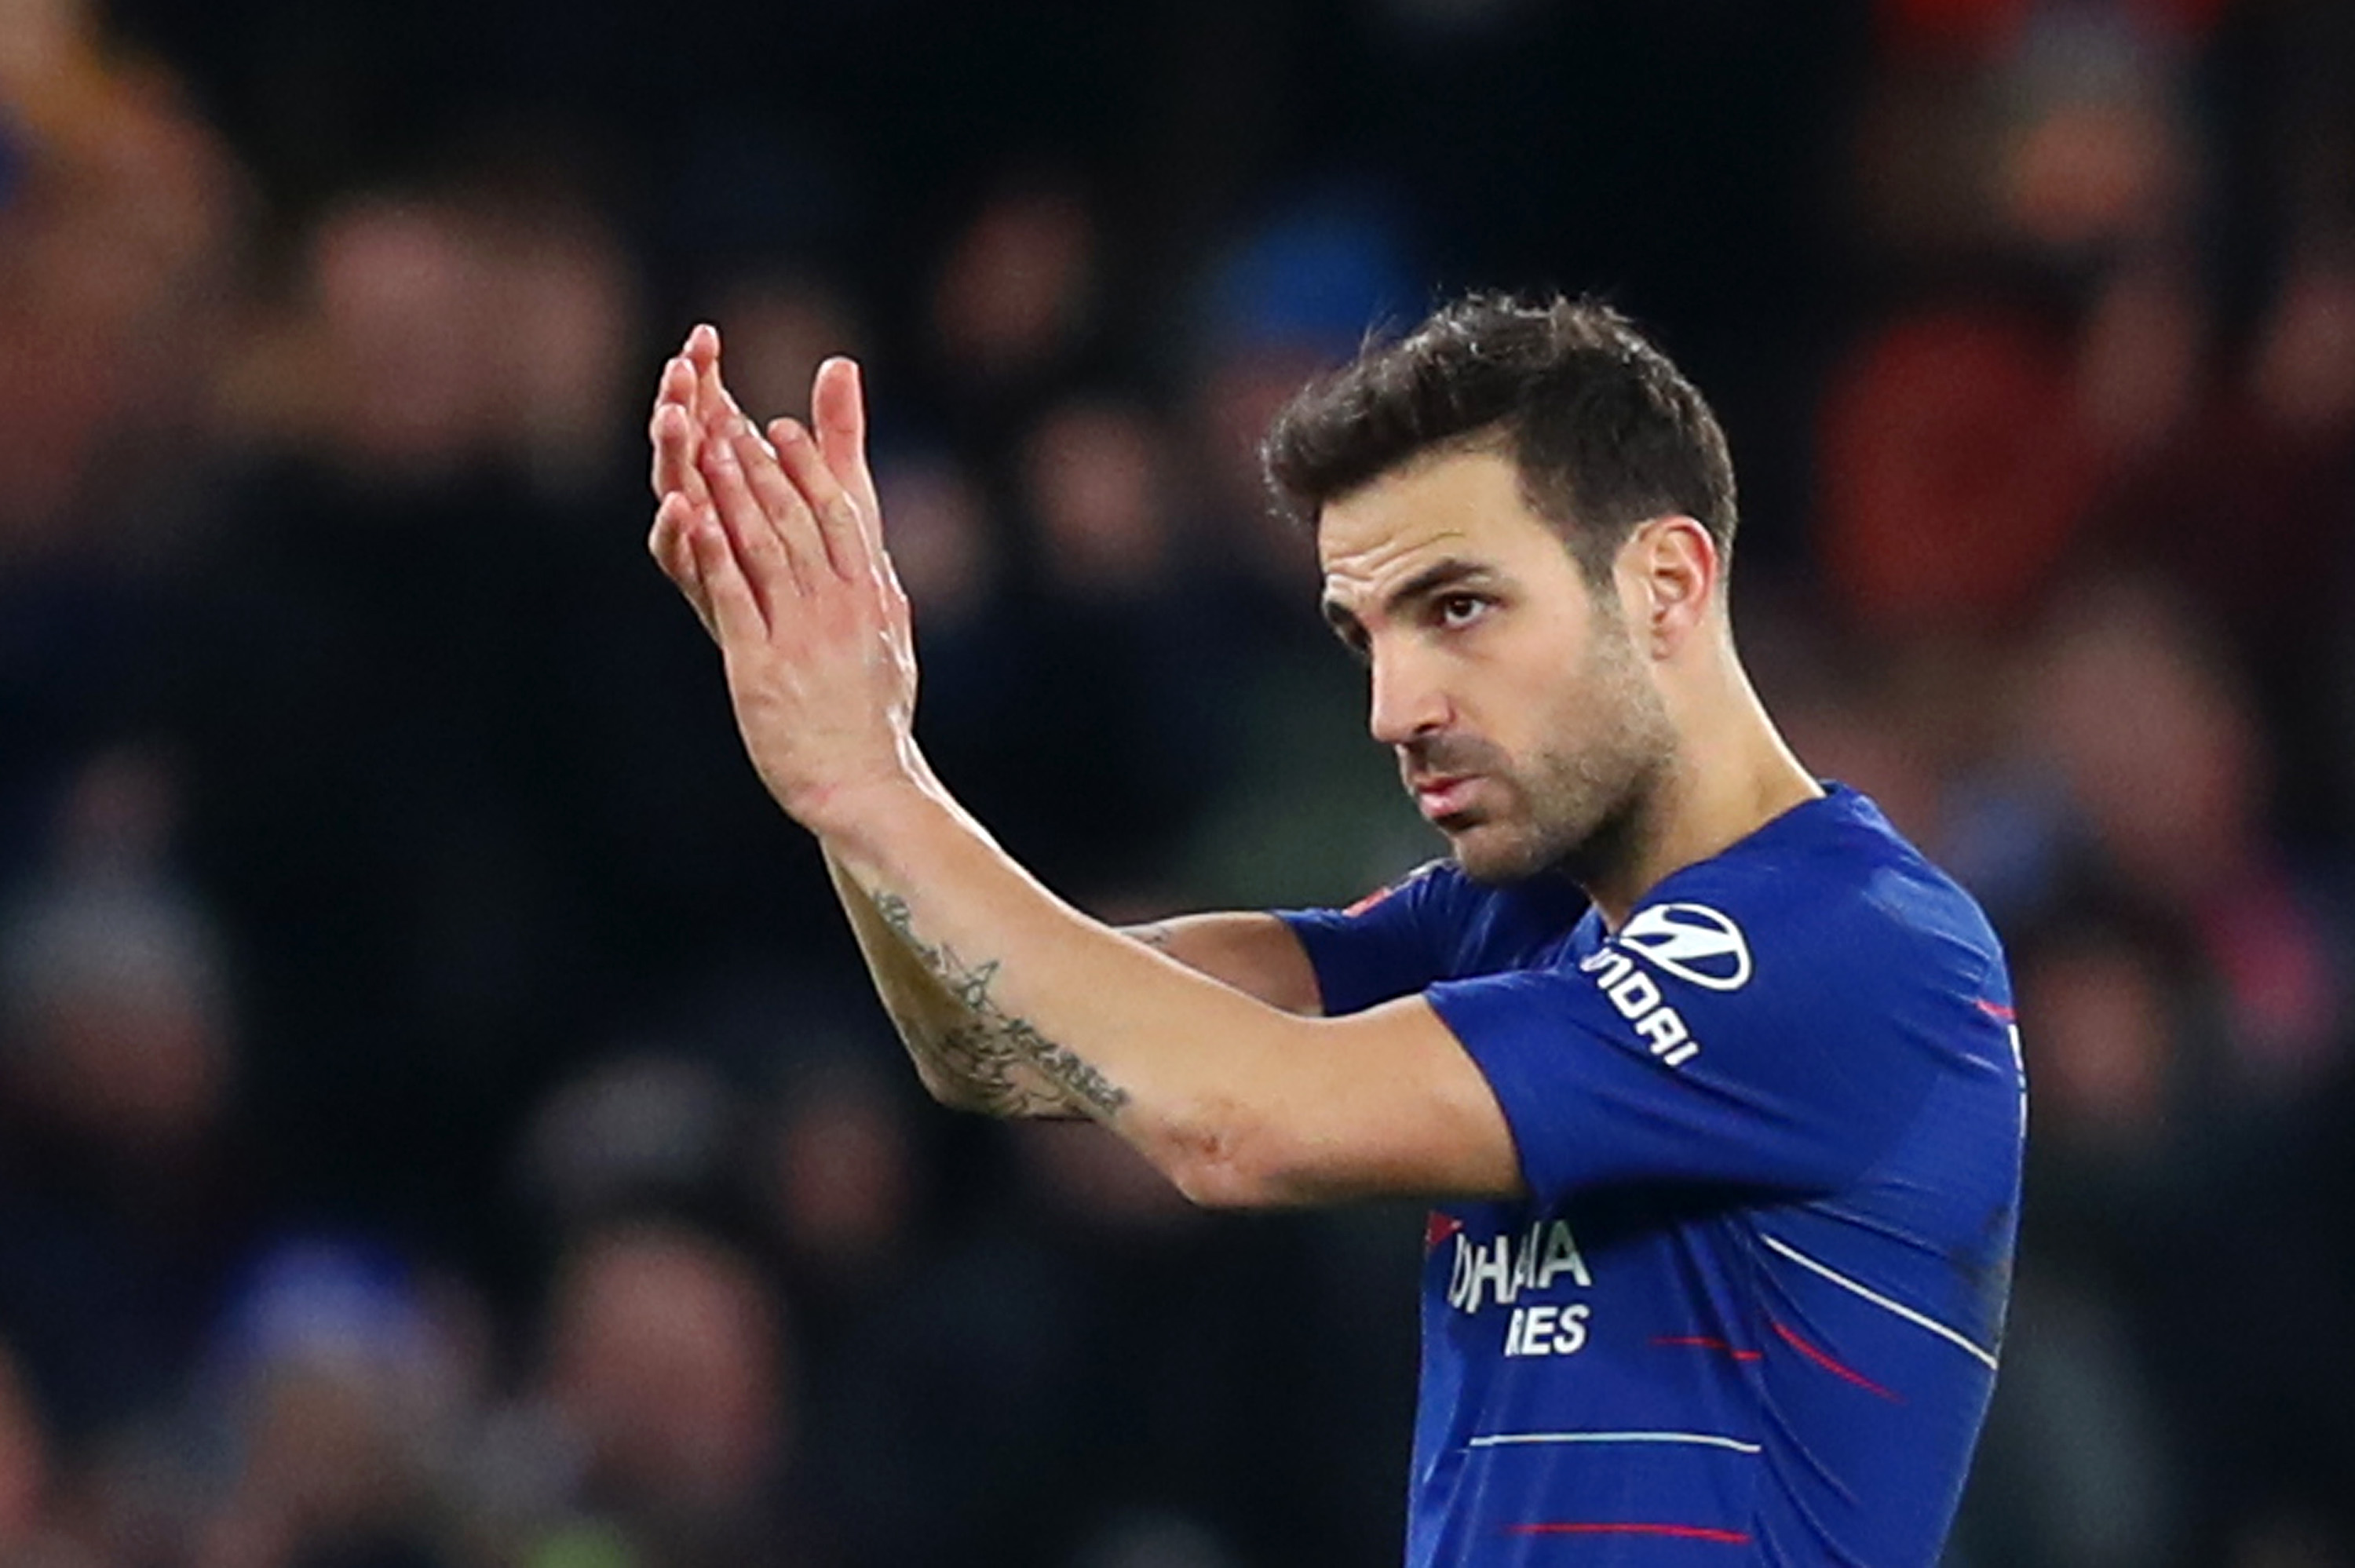 LONDON, ENGLAND - JANUARY 05:  Cesc Fabregas of Chelsea applauds the fans during the FA Cup Third Round match between Chelsea and Nottingham Forest at Stamford Bridge on January 5, 2019 in London, United Kingdom.  (Photo by Clive Rose/Getty Images)